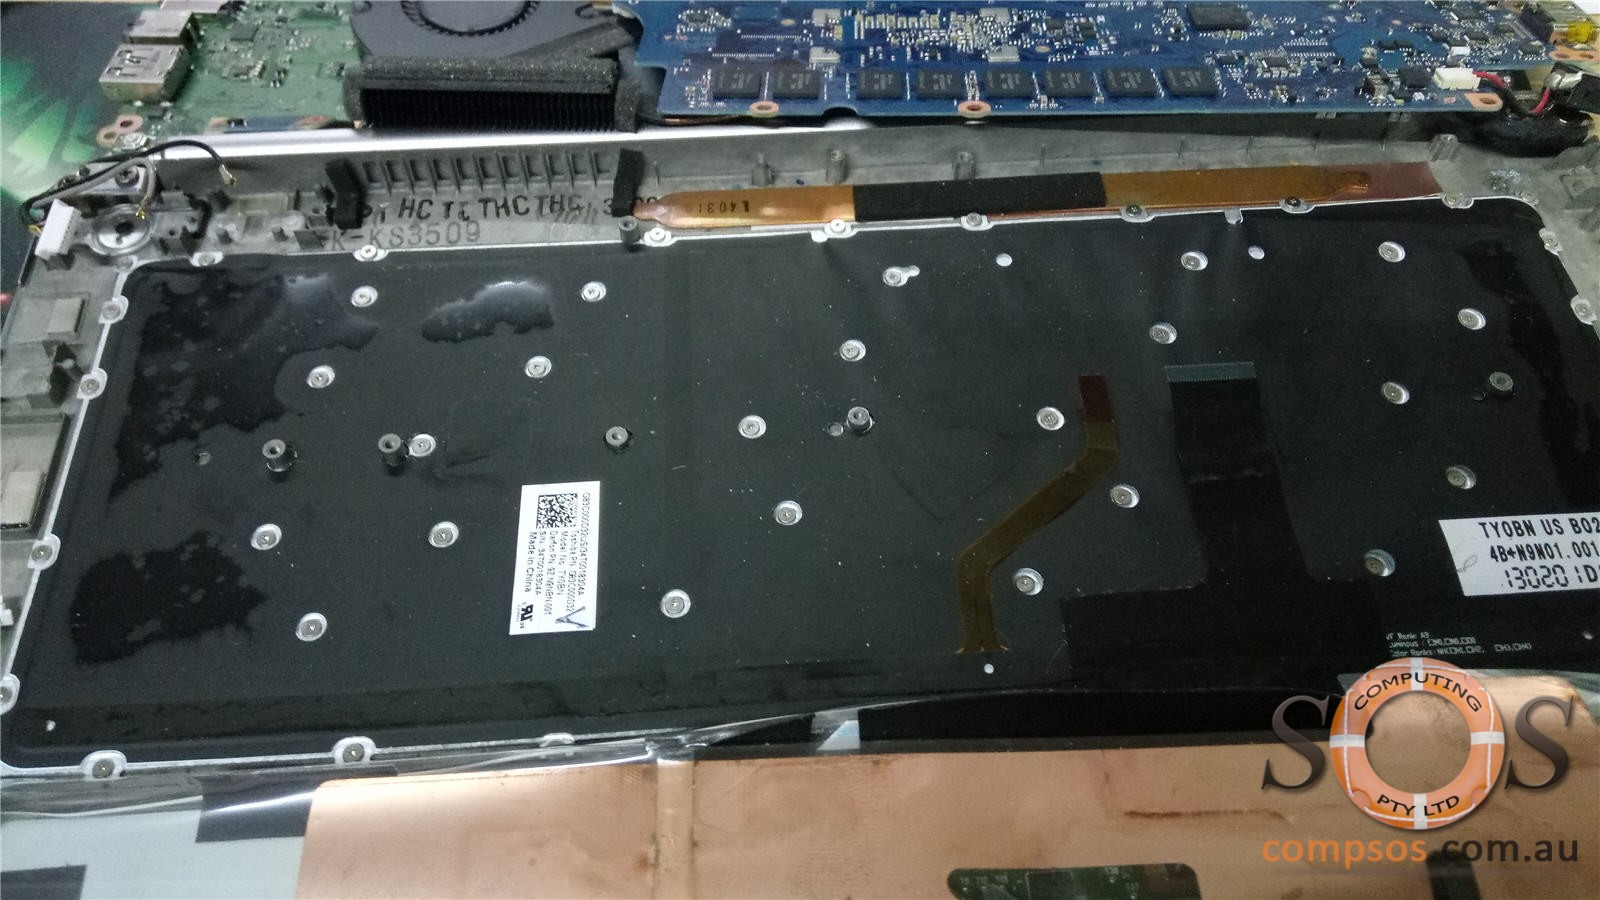 Toshiba Kirabook Touch showing more than 50 holes to secure the keyboard